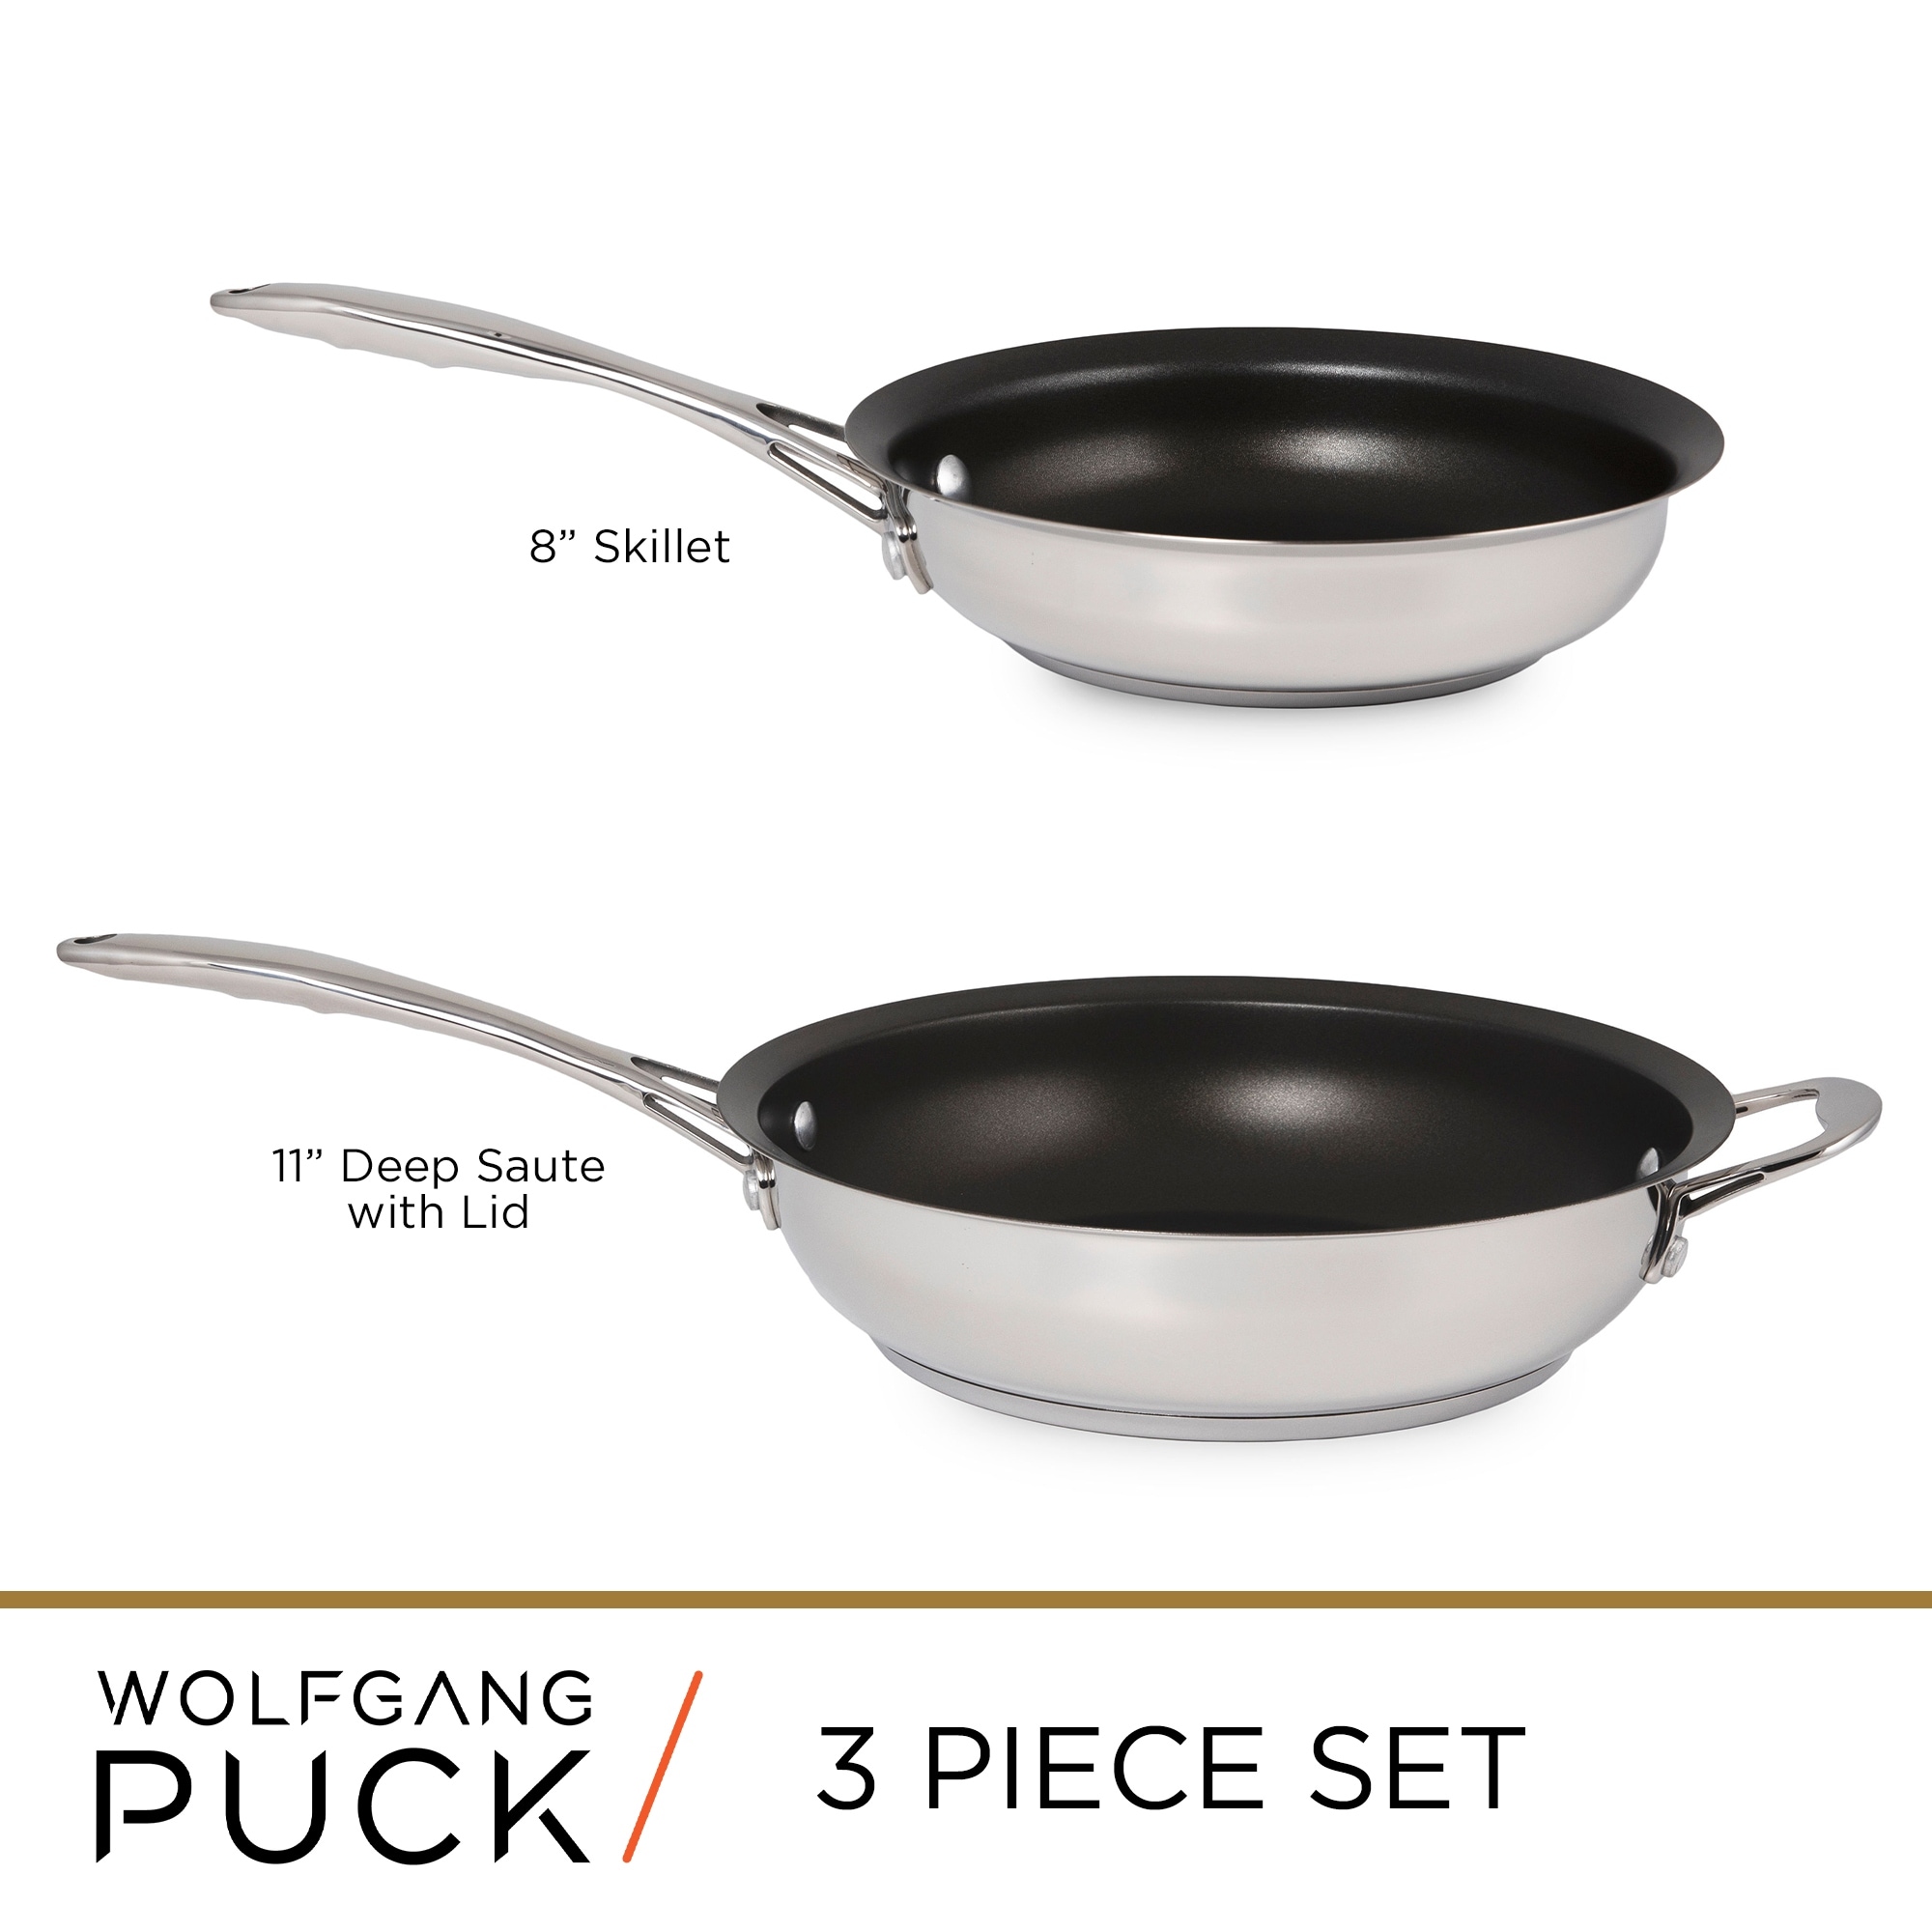 https://ak1.ostkcdn.com/images/products/is/images/direct/47eefd54af27d819487c992ebb10157f0492a27e/Wolfgang-Puck-3-Piece-Stainless-Steel-Skillet-Set%2C-Scratch-Resistant-Non-Stick-Coating%2C-Includes-a-Large-and-Small-Skillet.jpg